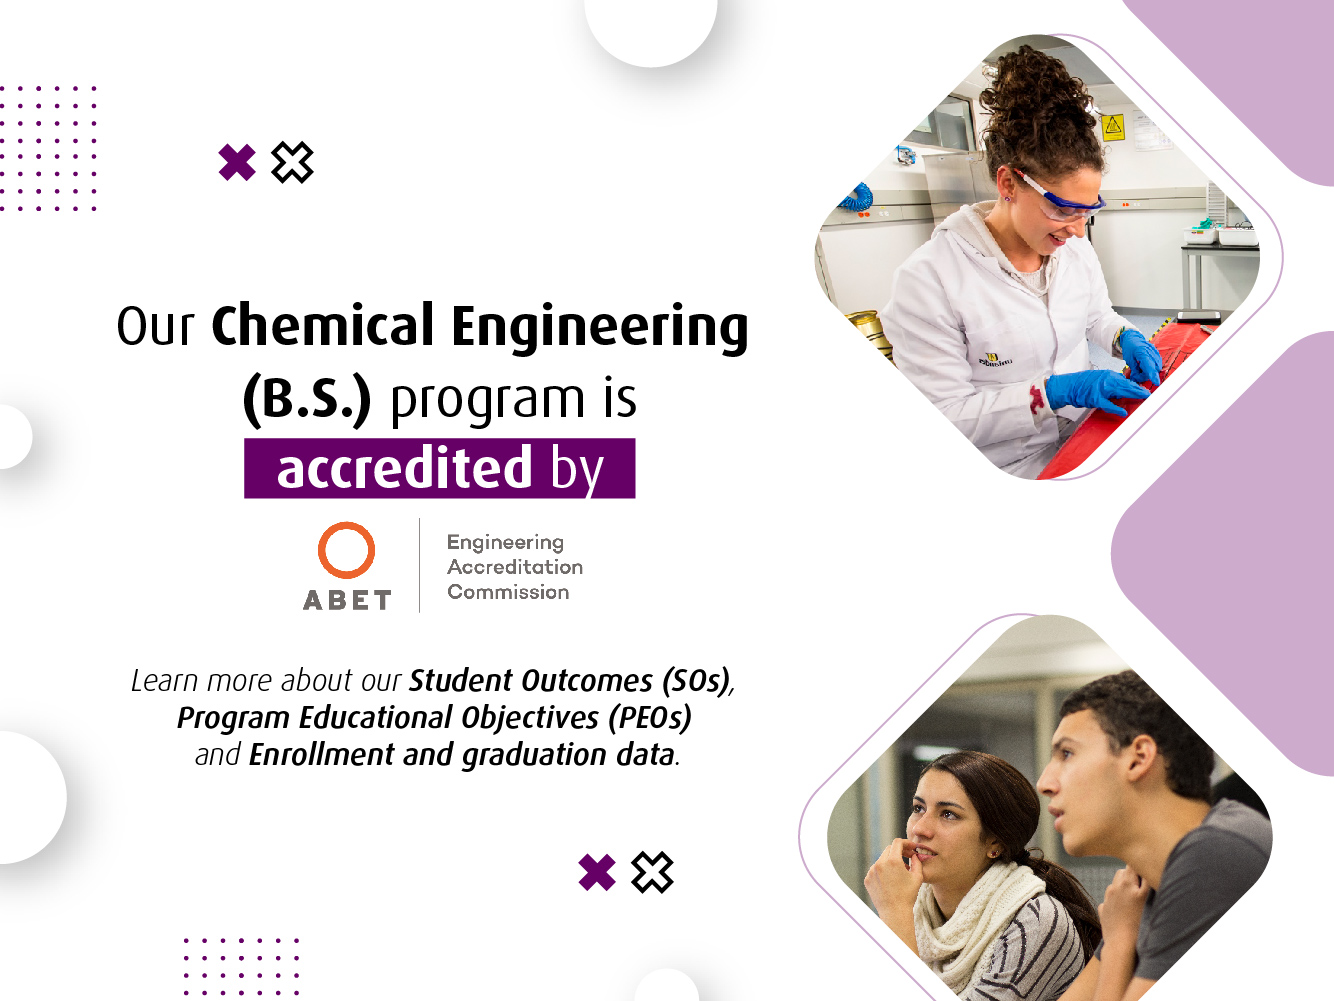 Our Chemical Engineering (B.S) Program is accredited by ABET